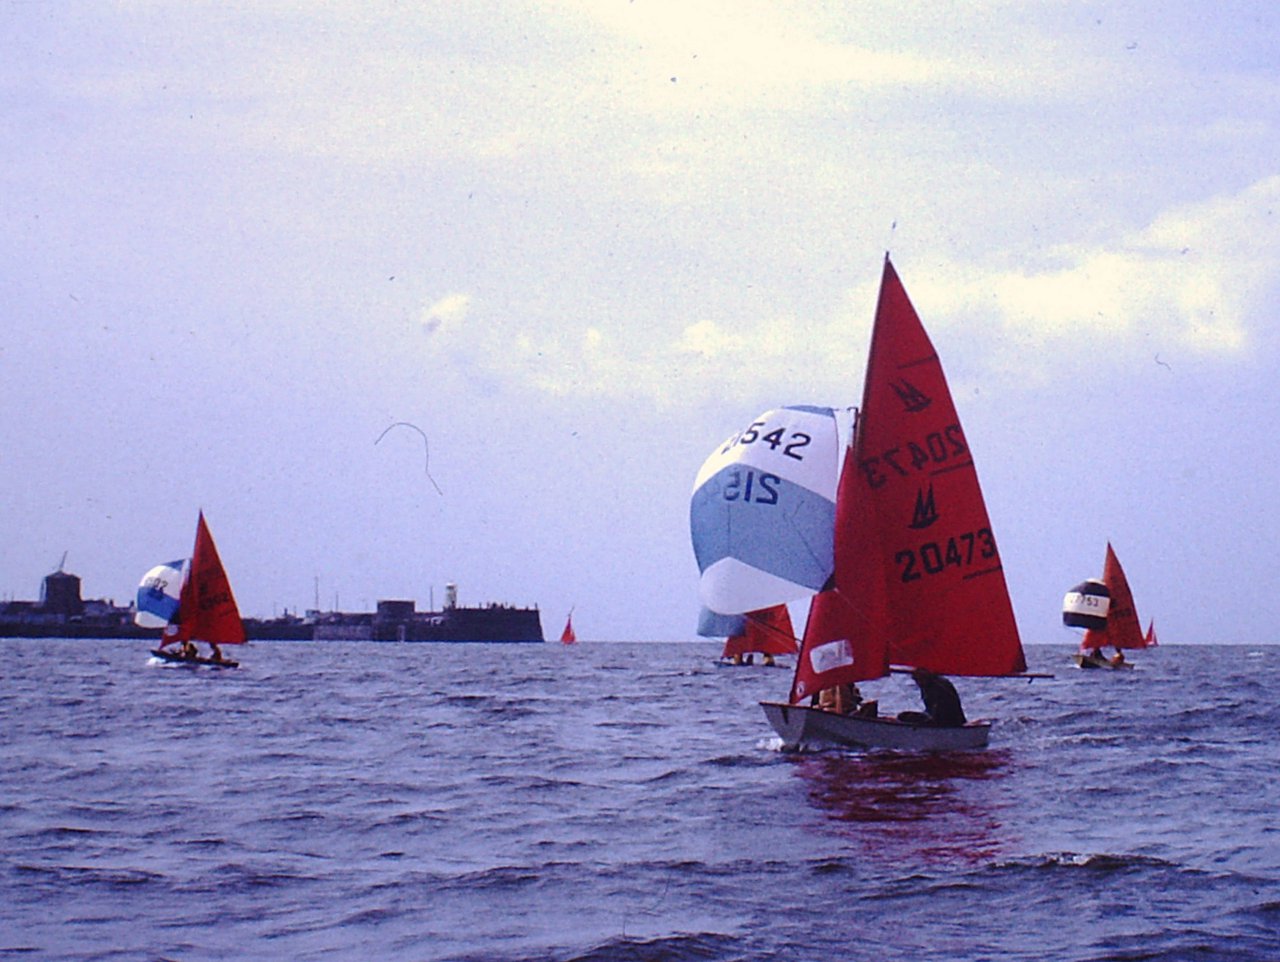 A fleet of Mirror dinghies running down to finish a race